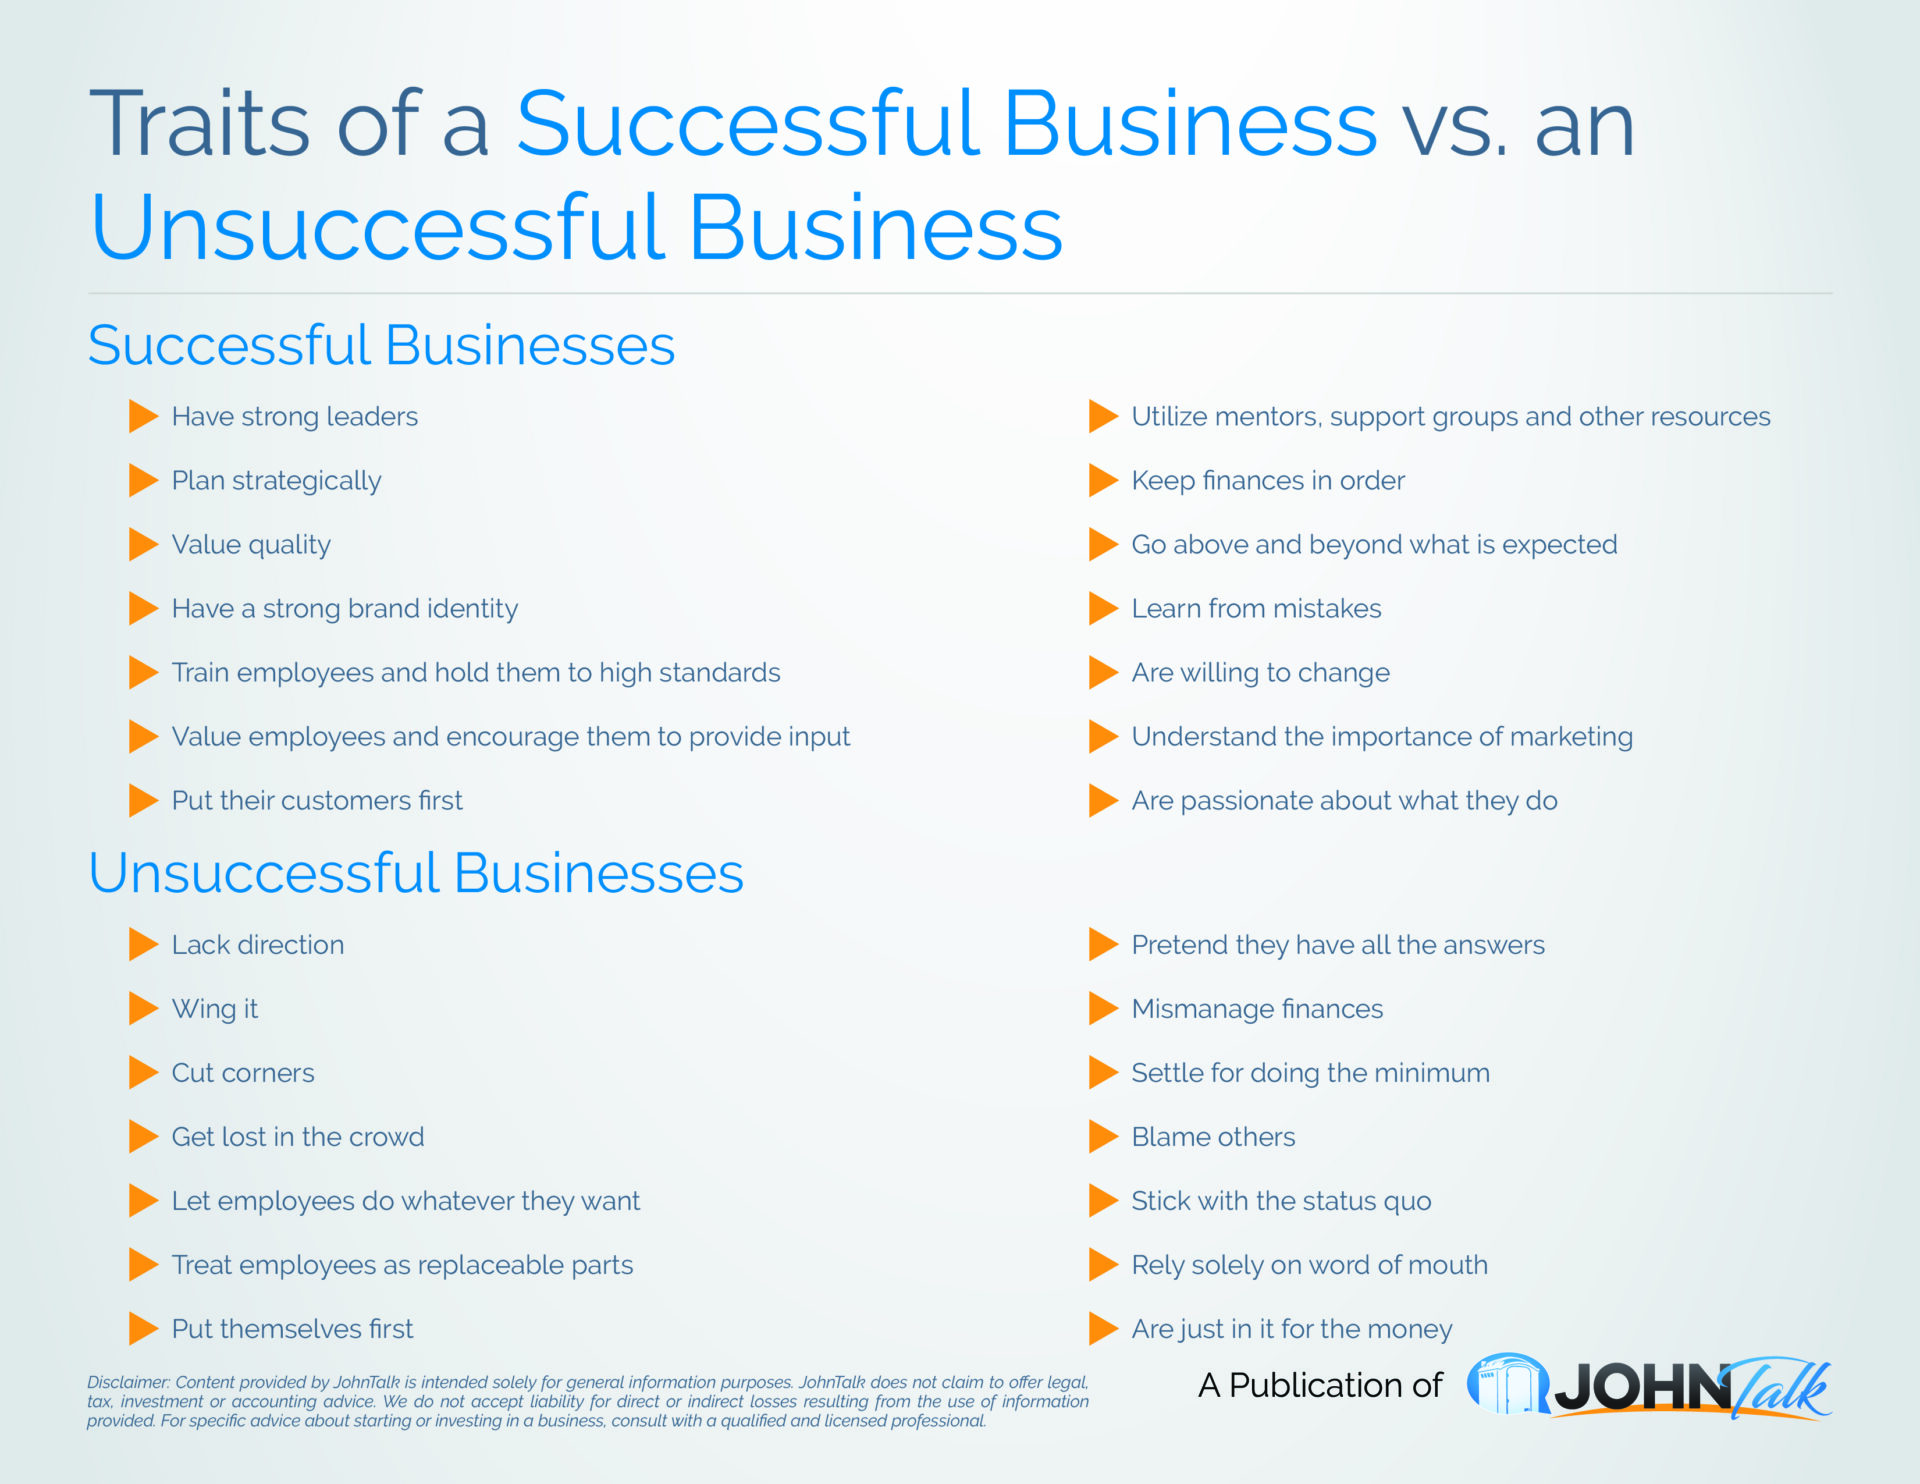 Traits of a Successful Business vs. an Unsuccessful Business